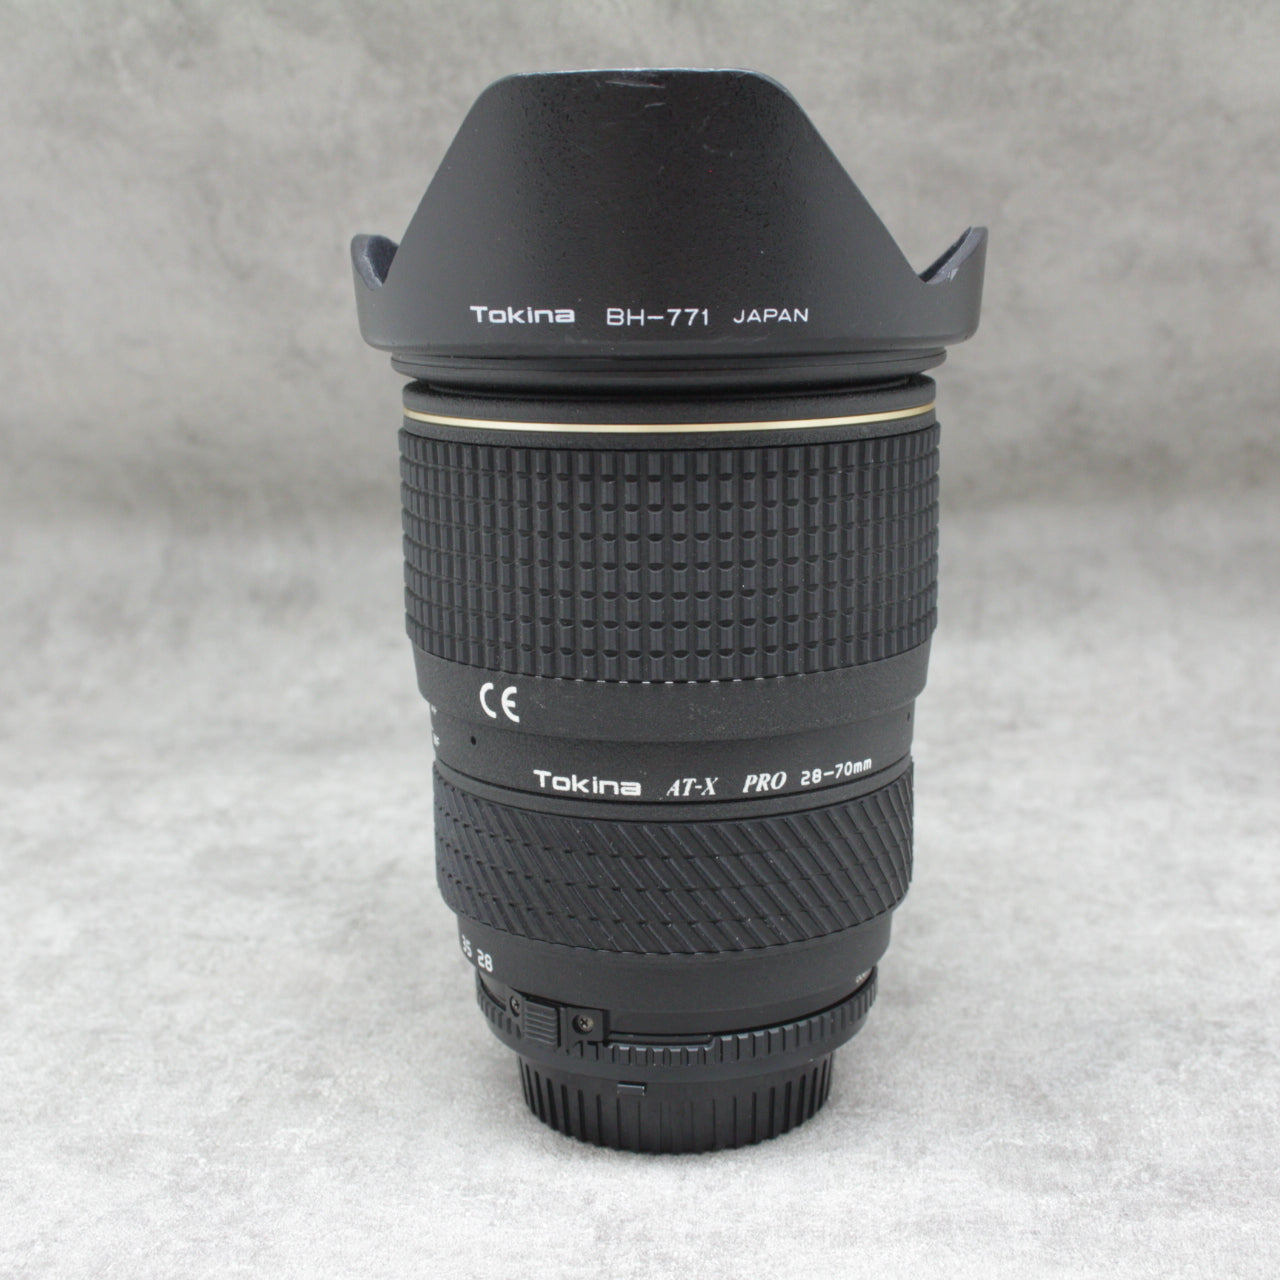 Tokina トキナー AT-X PRO 28-70mm F2.8 for Nikon-